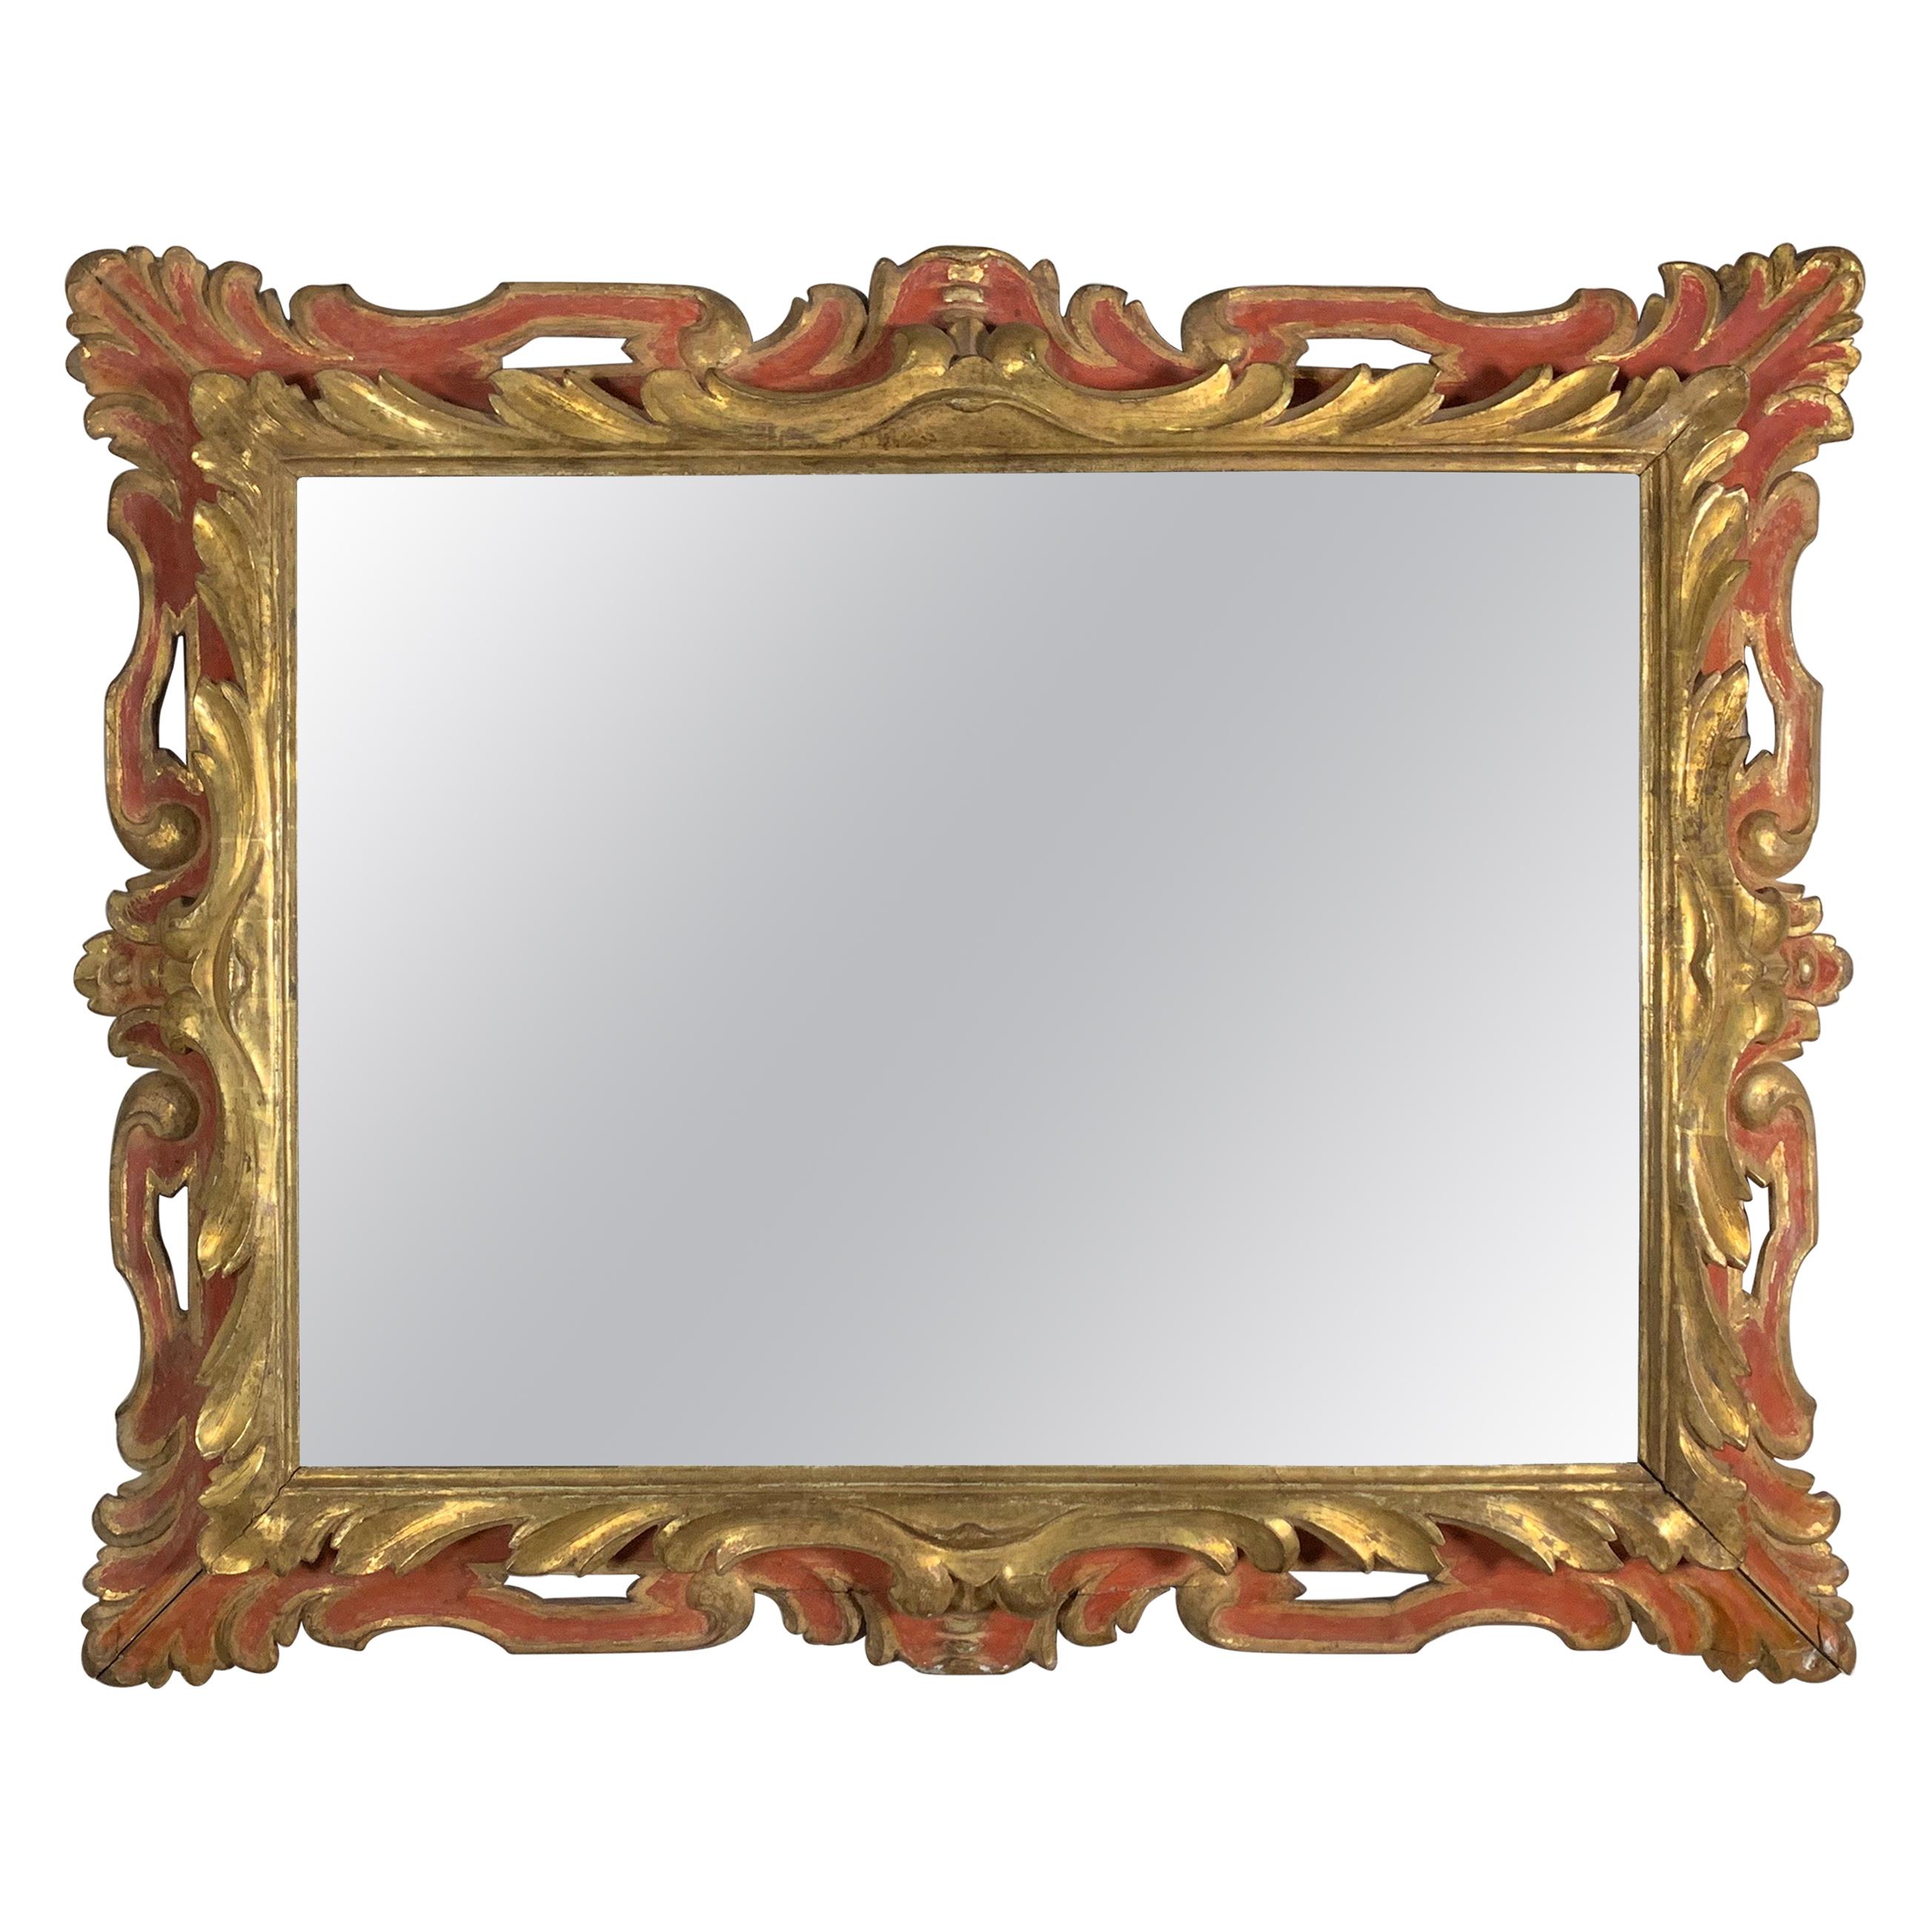 19th Century Italian Painted and Parcel-Gilt Mirror